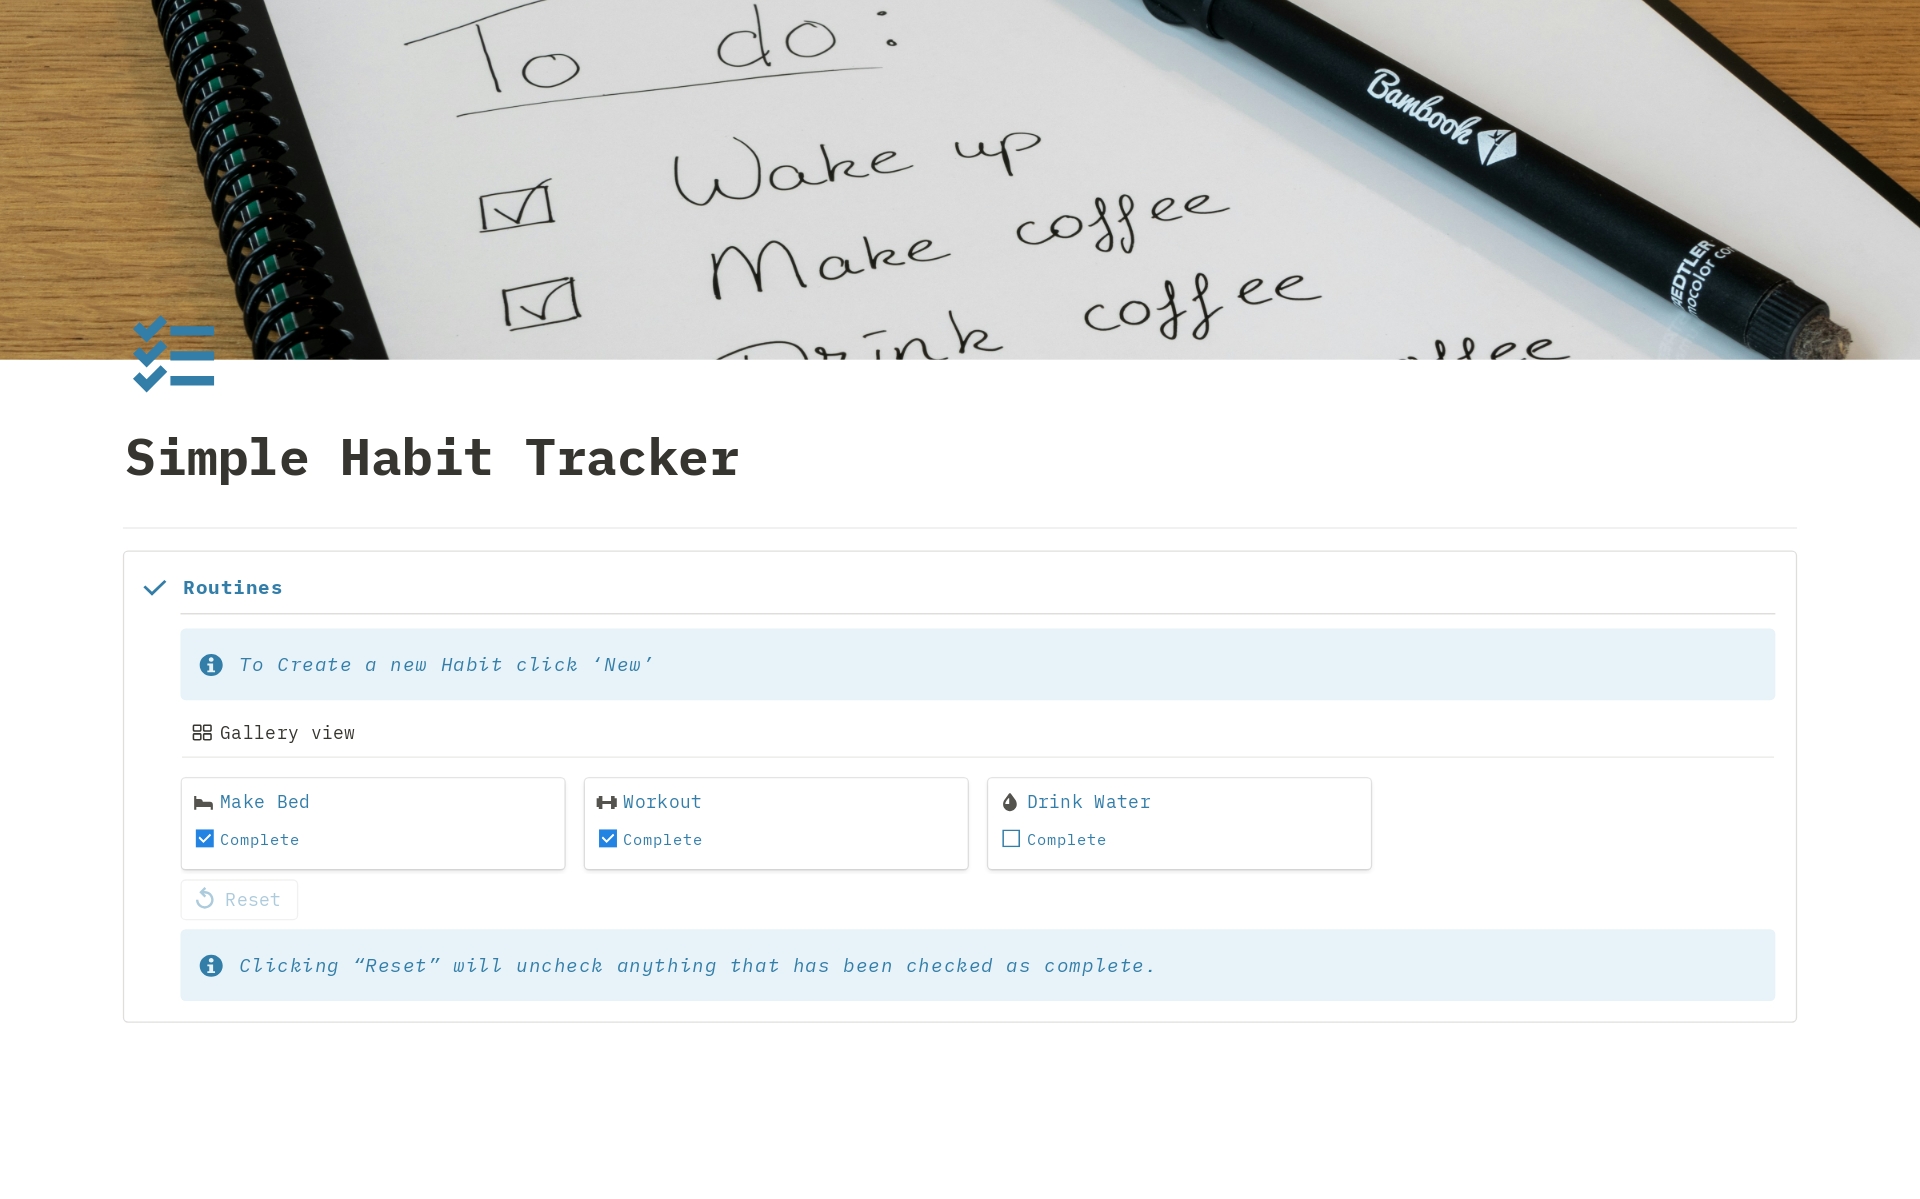 Track and improve your daily habits effortlessly with the Simple Habit Tracker Notion Template. This user-friendly tool helps you set goals, monitor progress, and cultivate positive routines, enhancing your productivity and well-being.